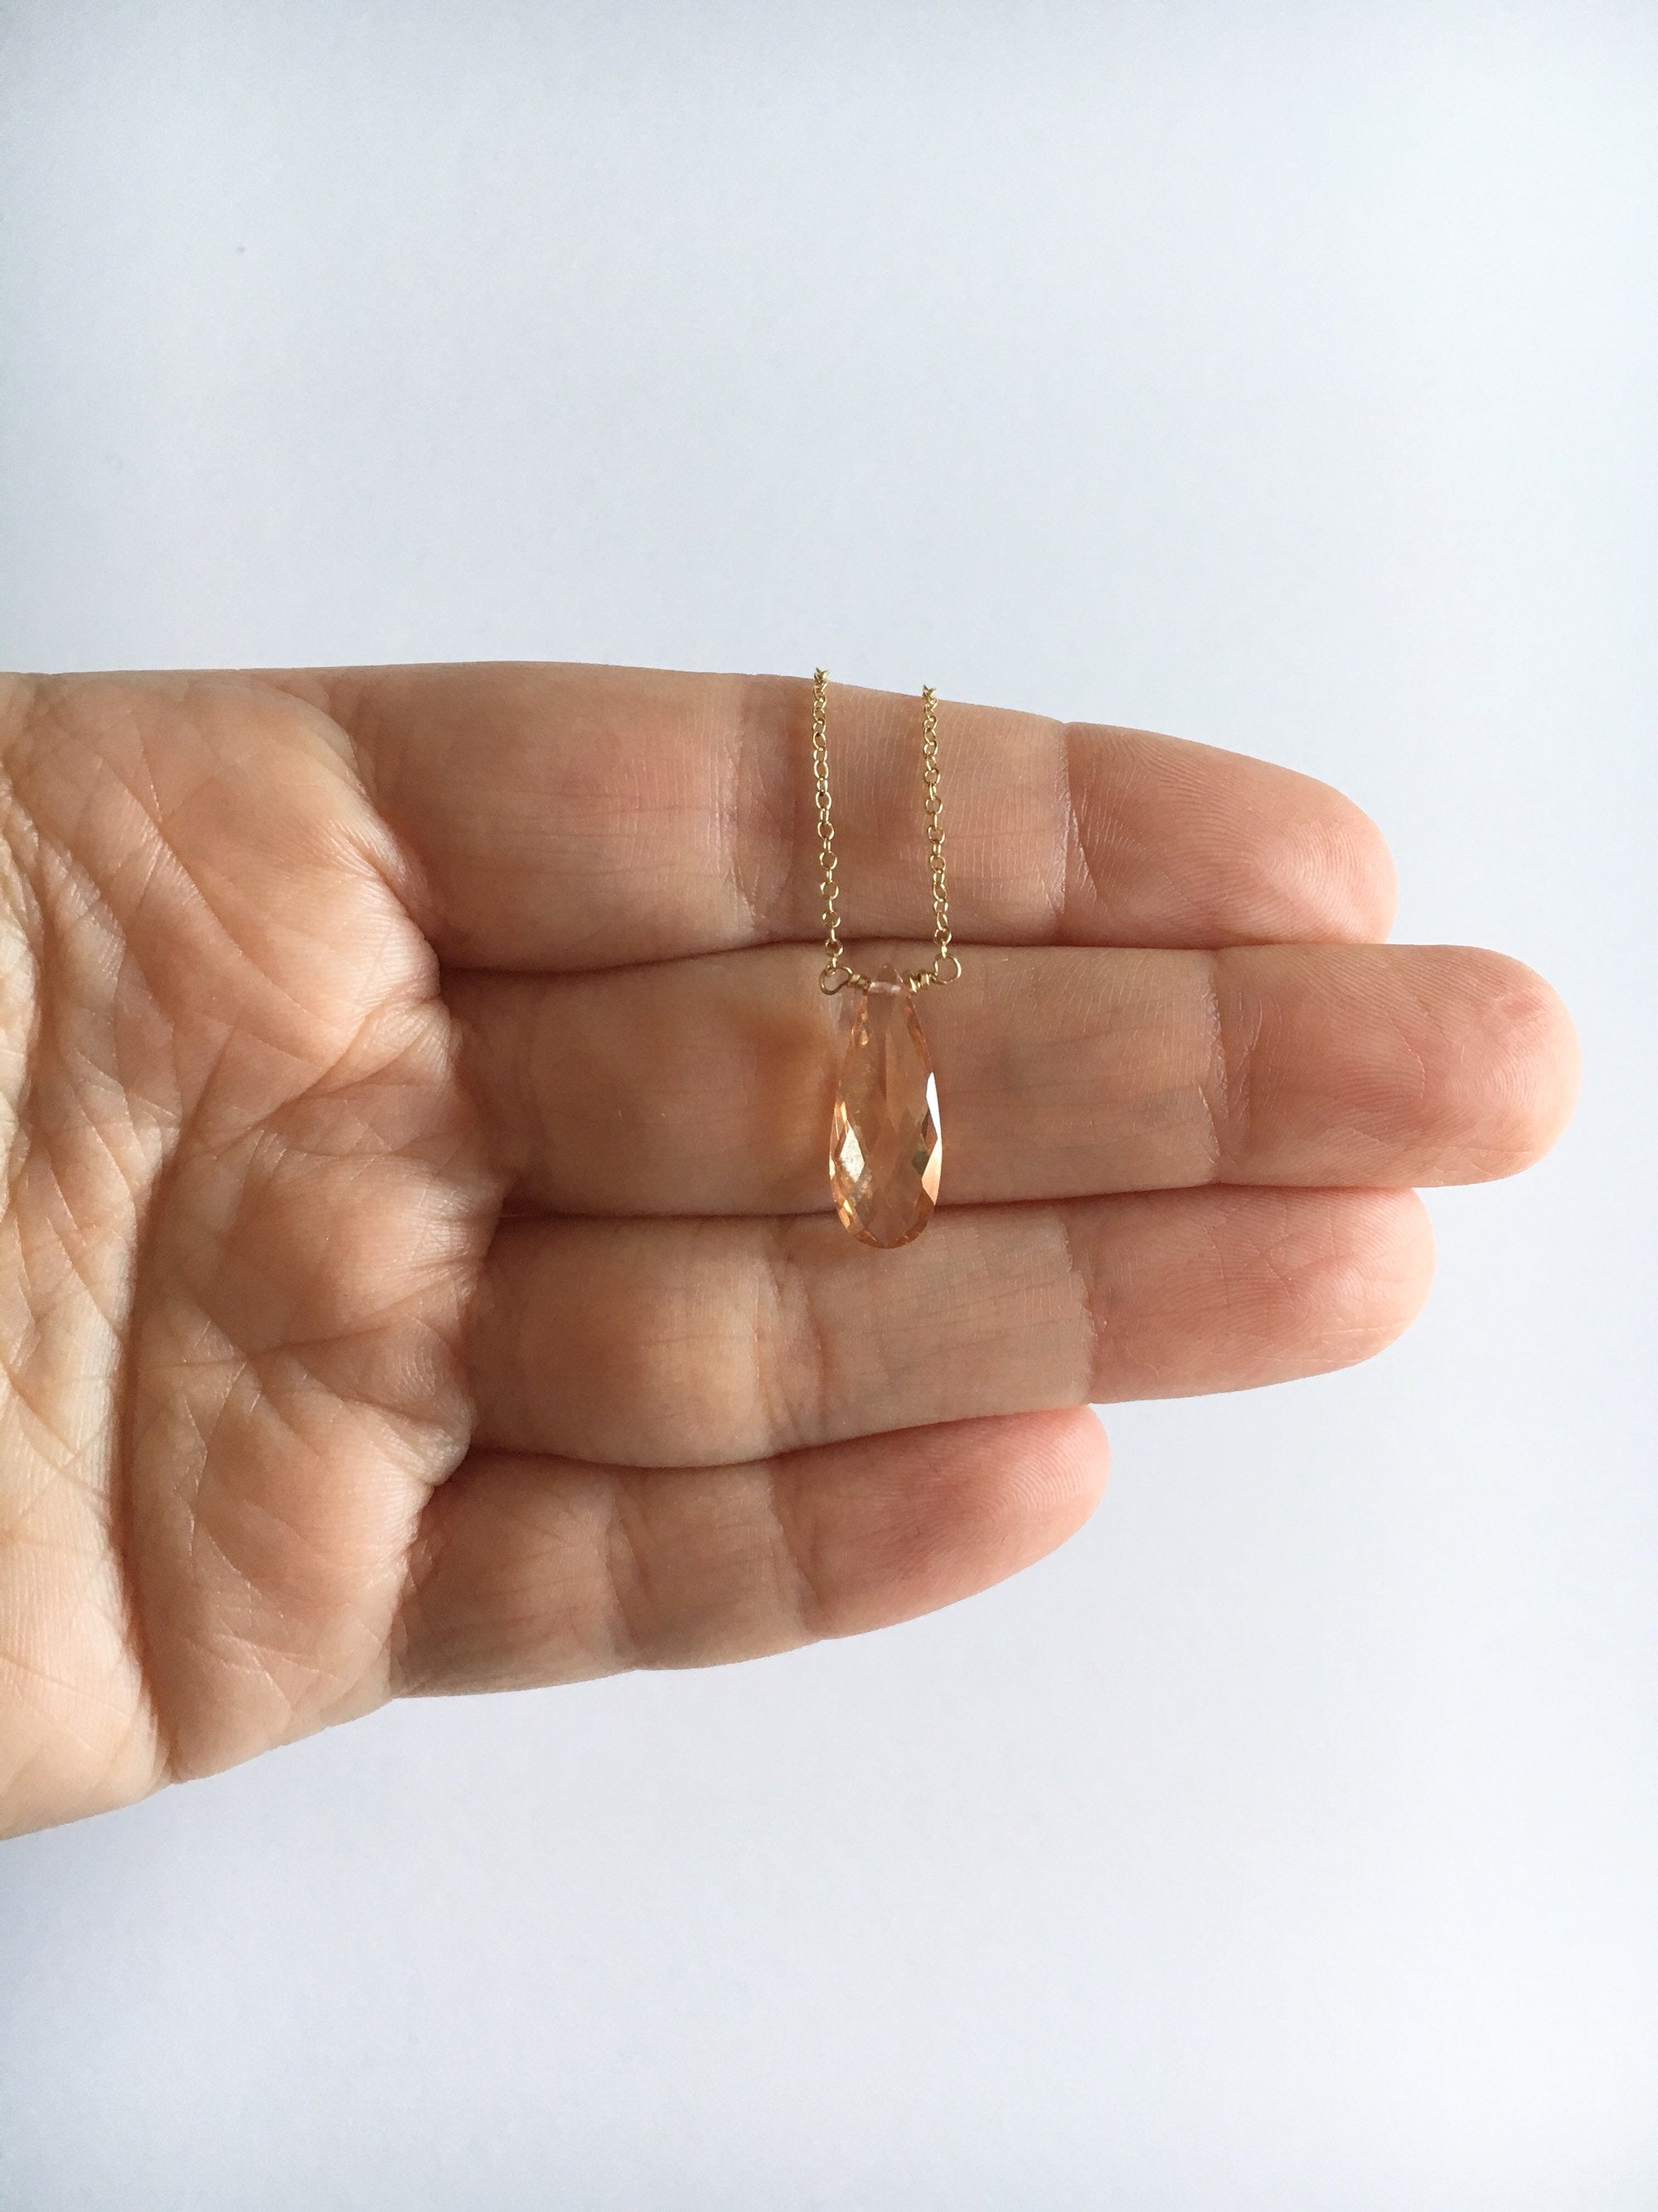 Cubic zirconia teardrop crystal pendant on gold filled chain necklace – available in champaign laying over fingers.